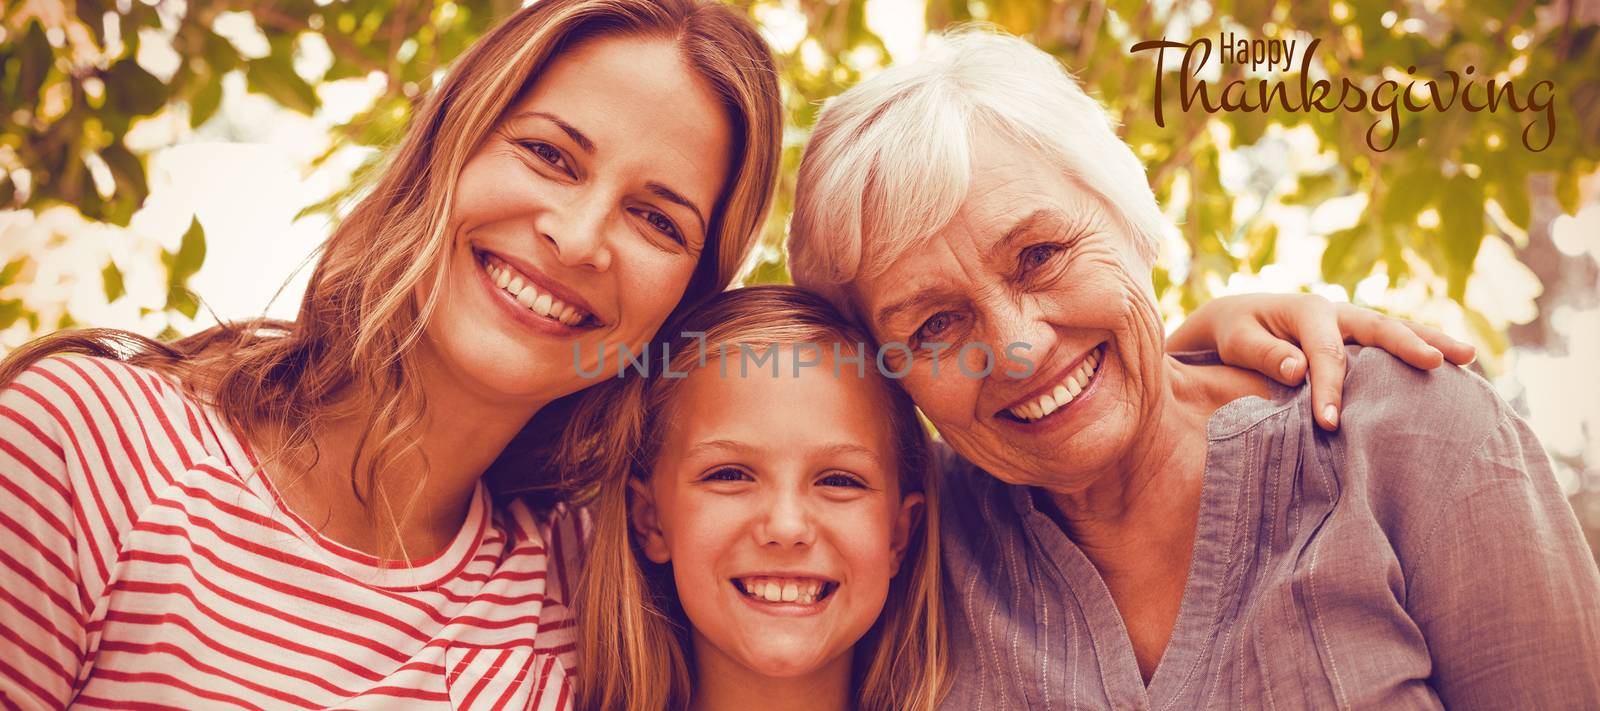 Illustration of happy thanksgiving day text greeting against portrait of happy family with granny 